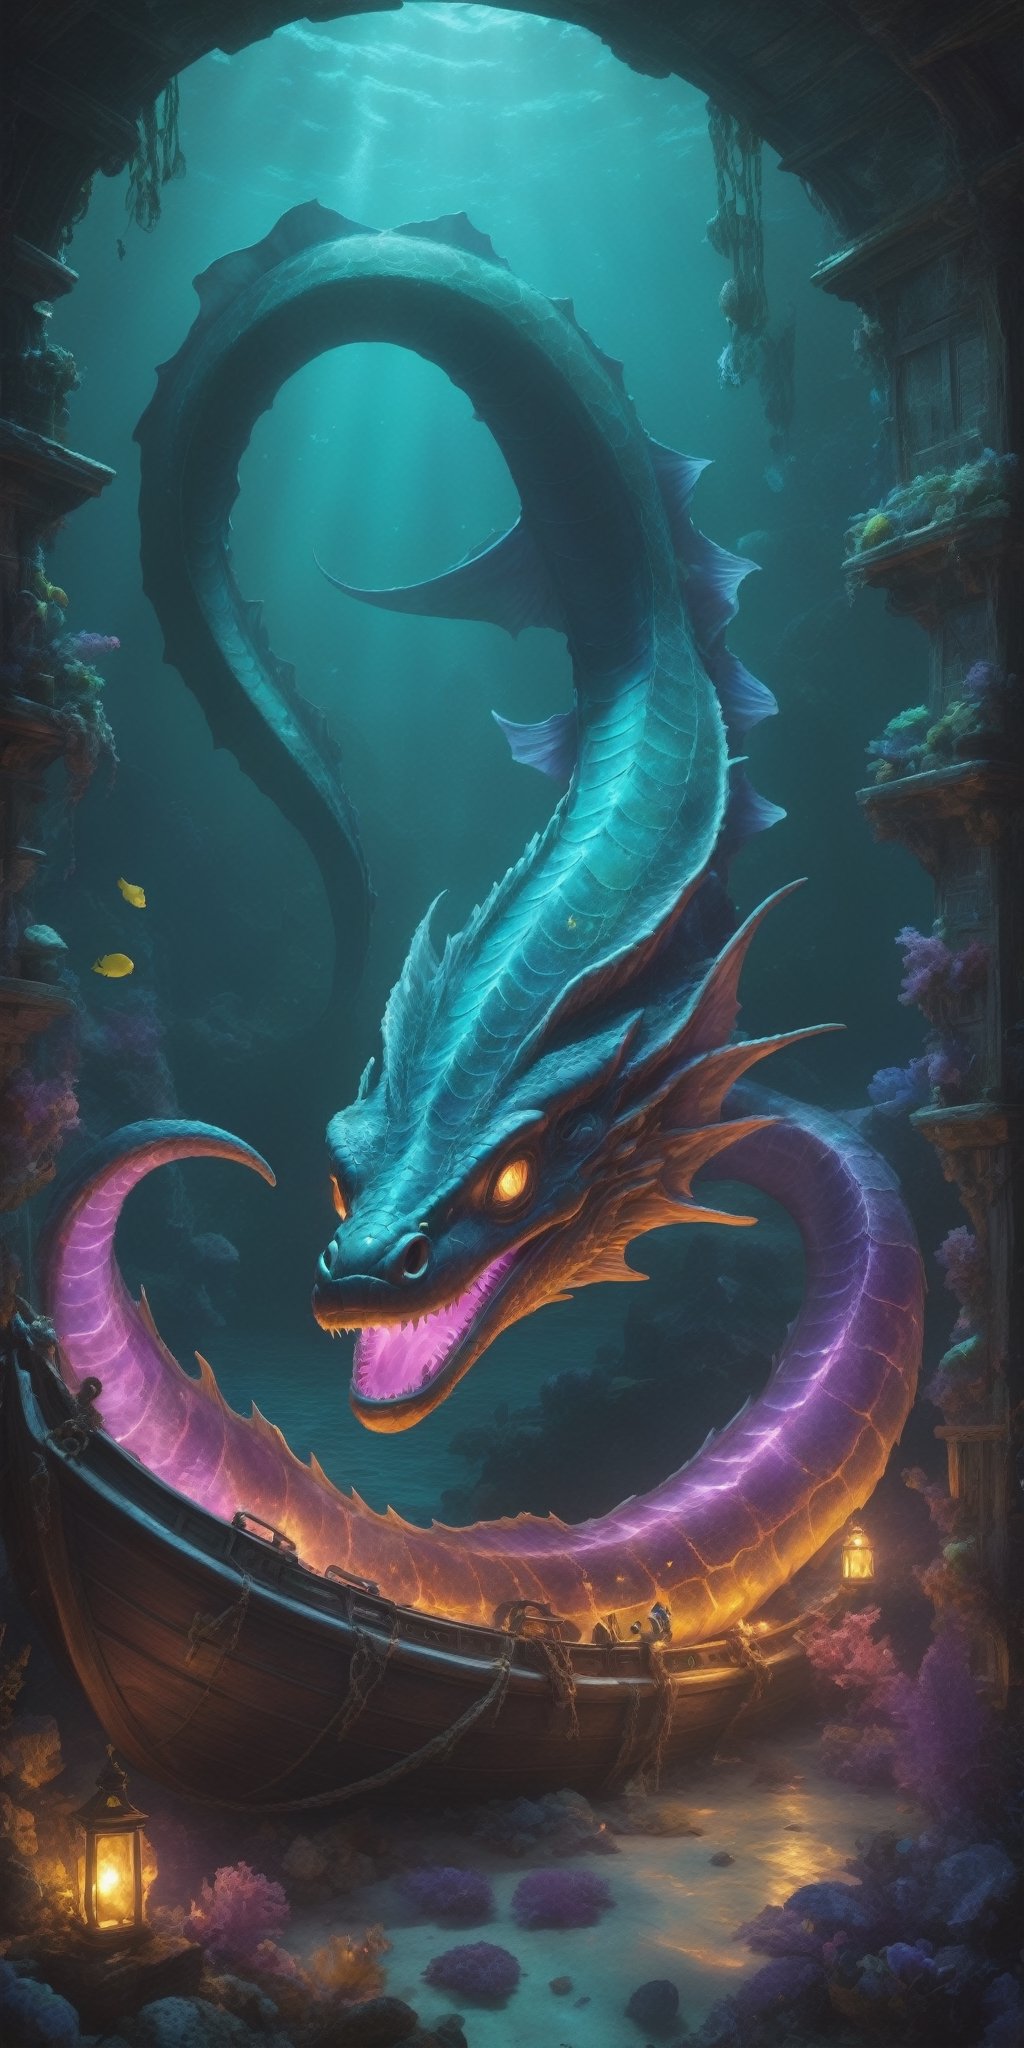 A luminescent sea serpent with scales that shimmer like amethysts coils around a sunken galleon, its bioluminescent light illuminating the treasures within. Ghostly pirates peer out from portholes, their expressions a mix of awe and fear.
